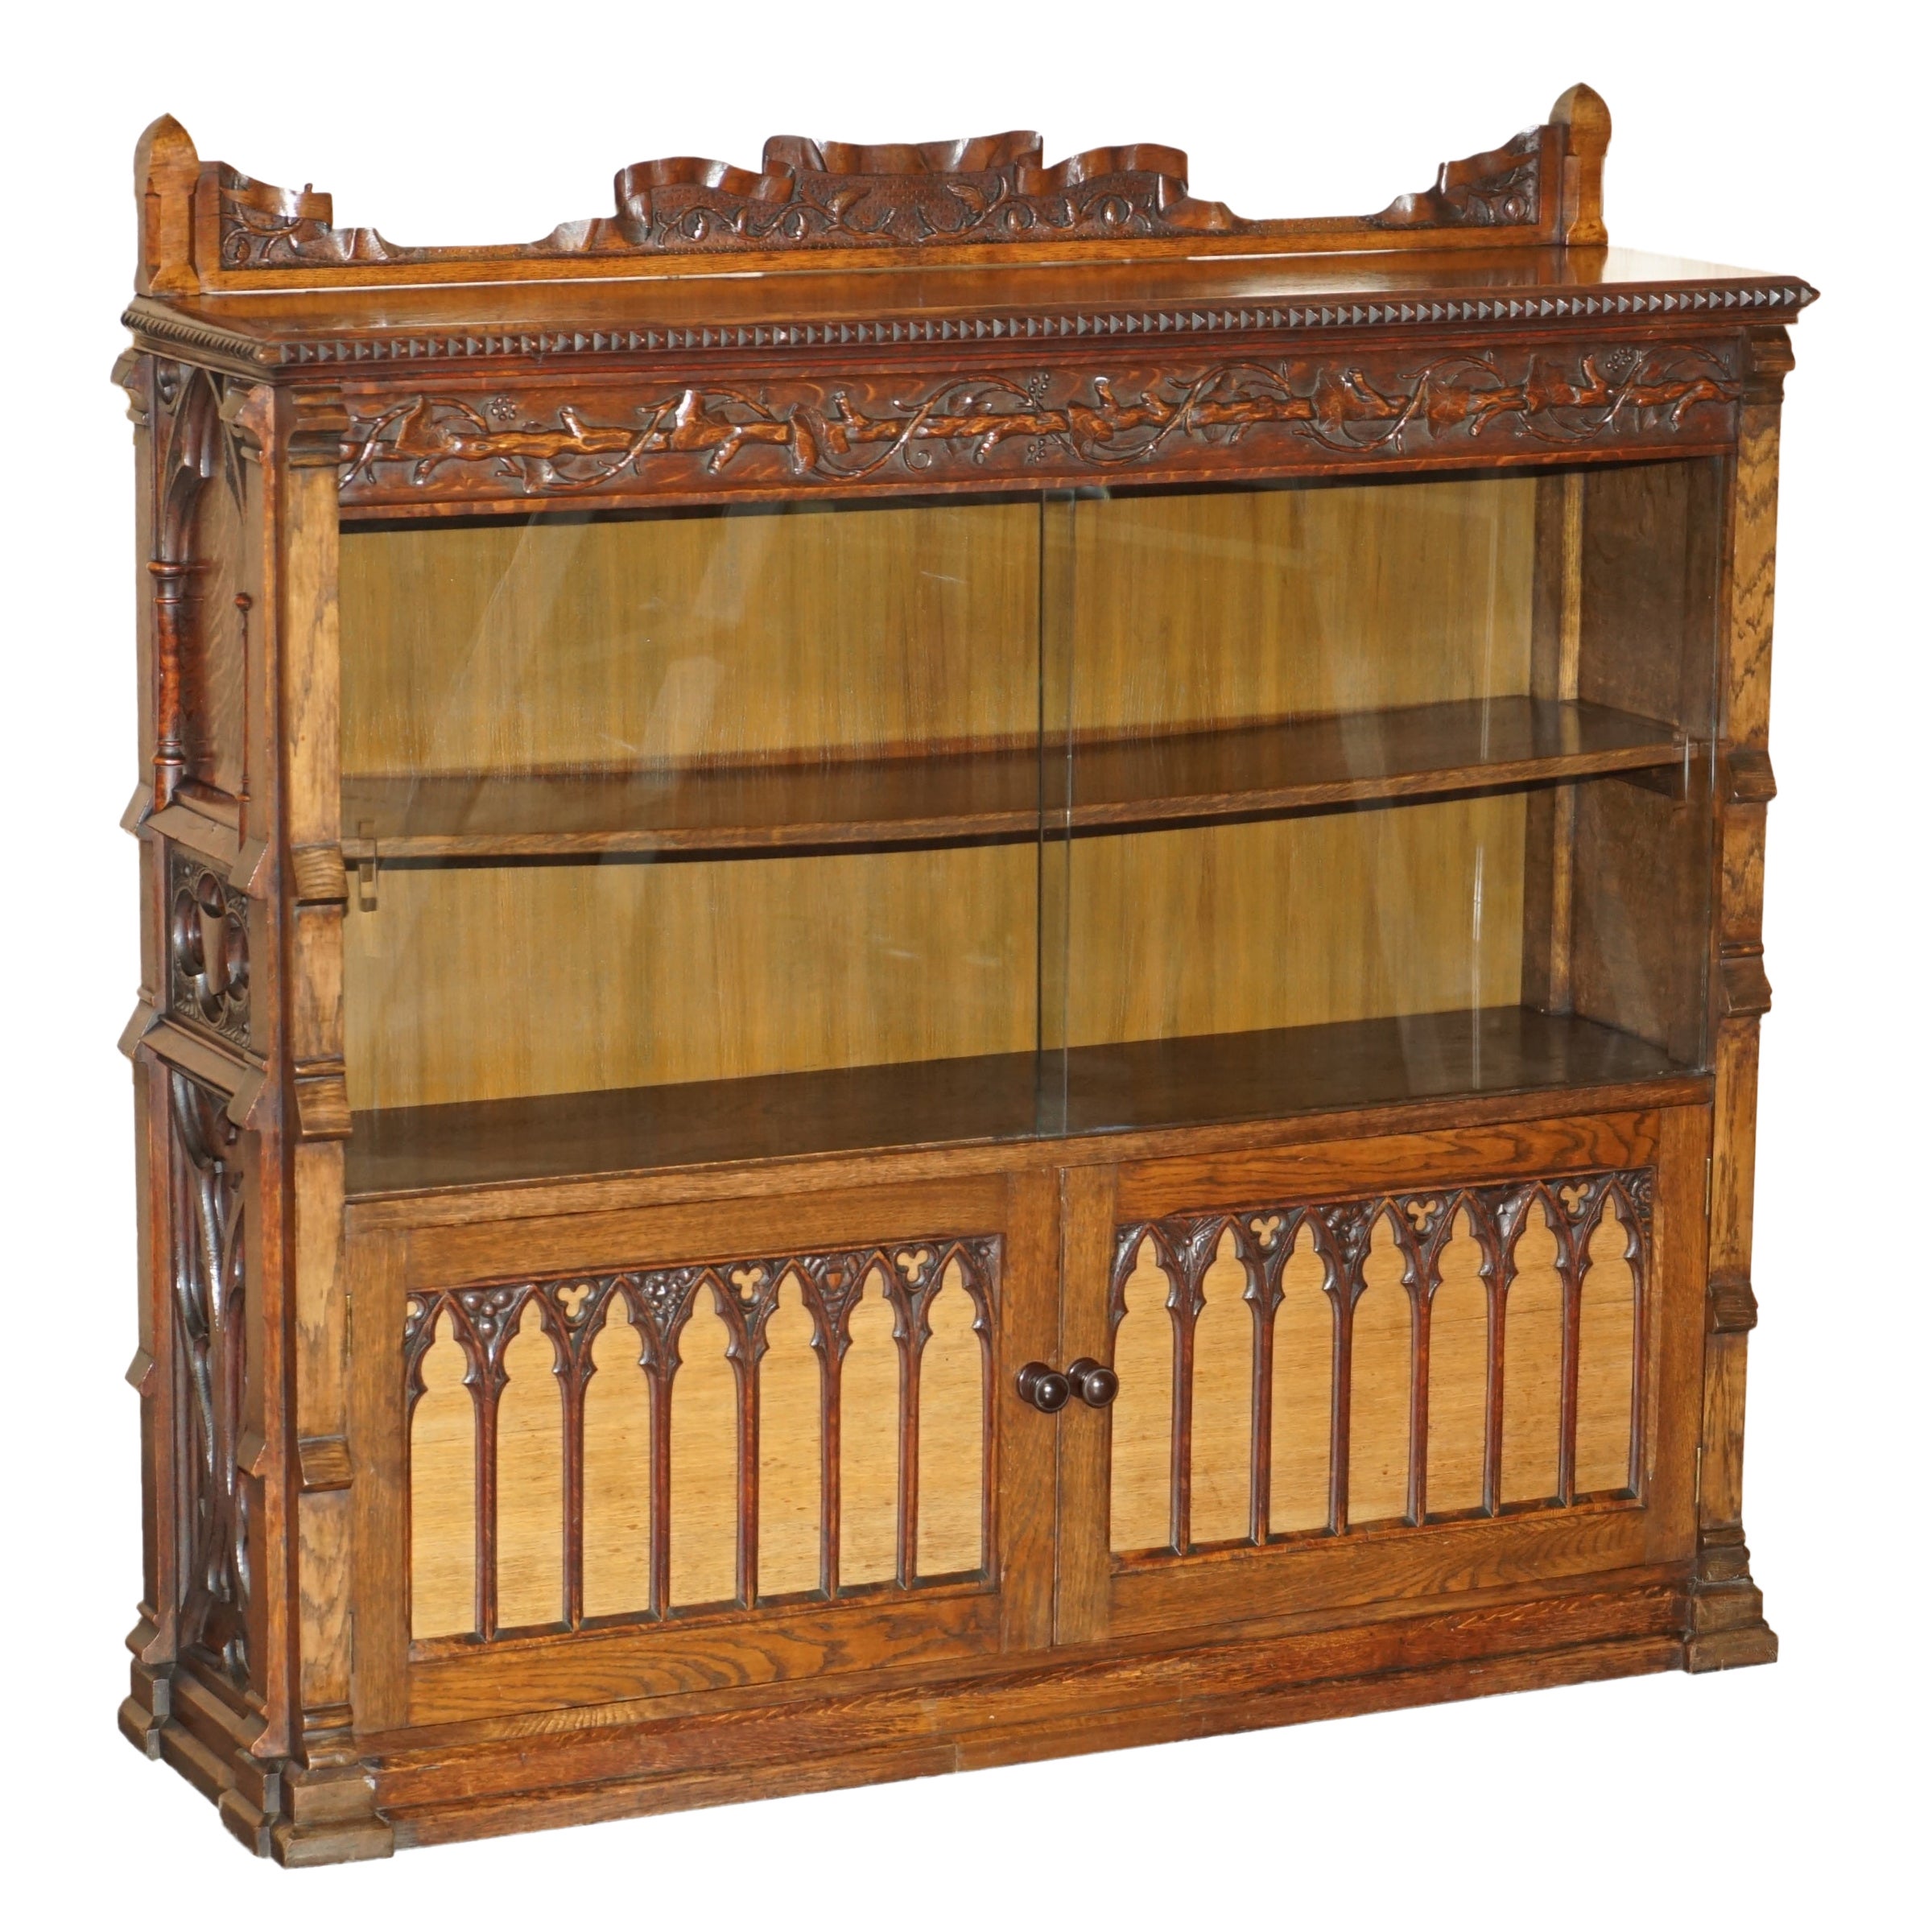 EXQUISiTE & IMPORTANT ORNATELY HAND CARVED GOTHIC REVIVAL PUGIN STYLE BOOKCASE